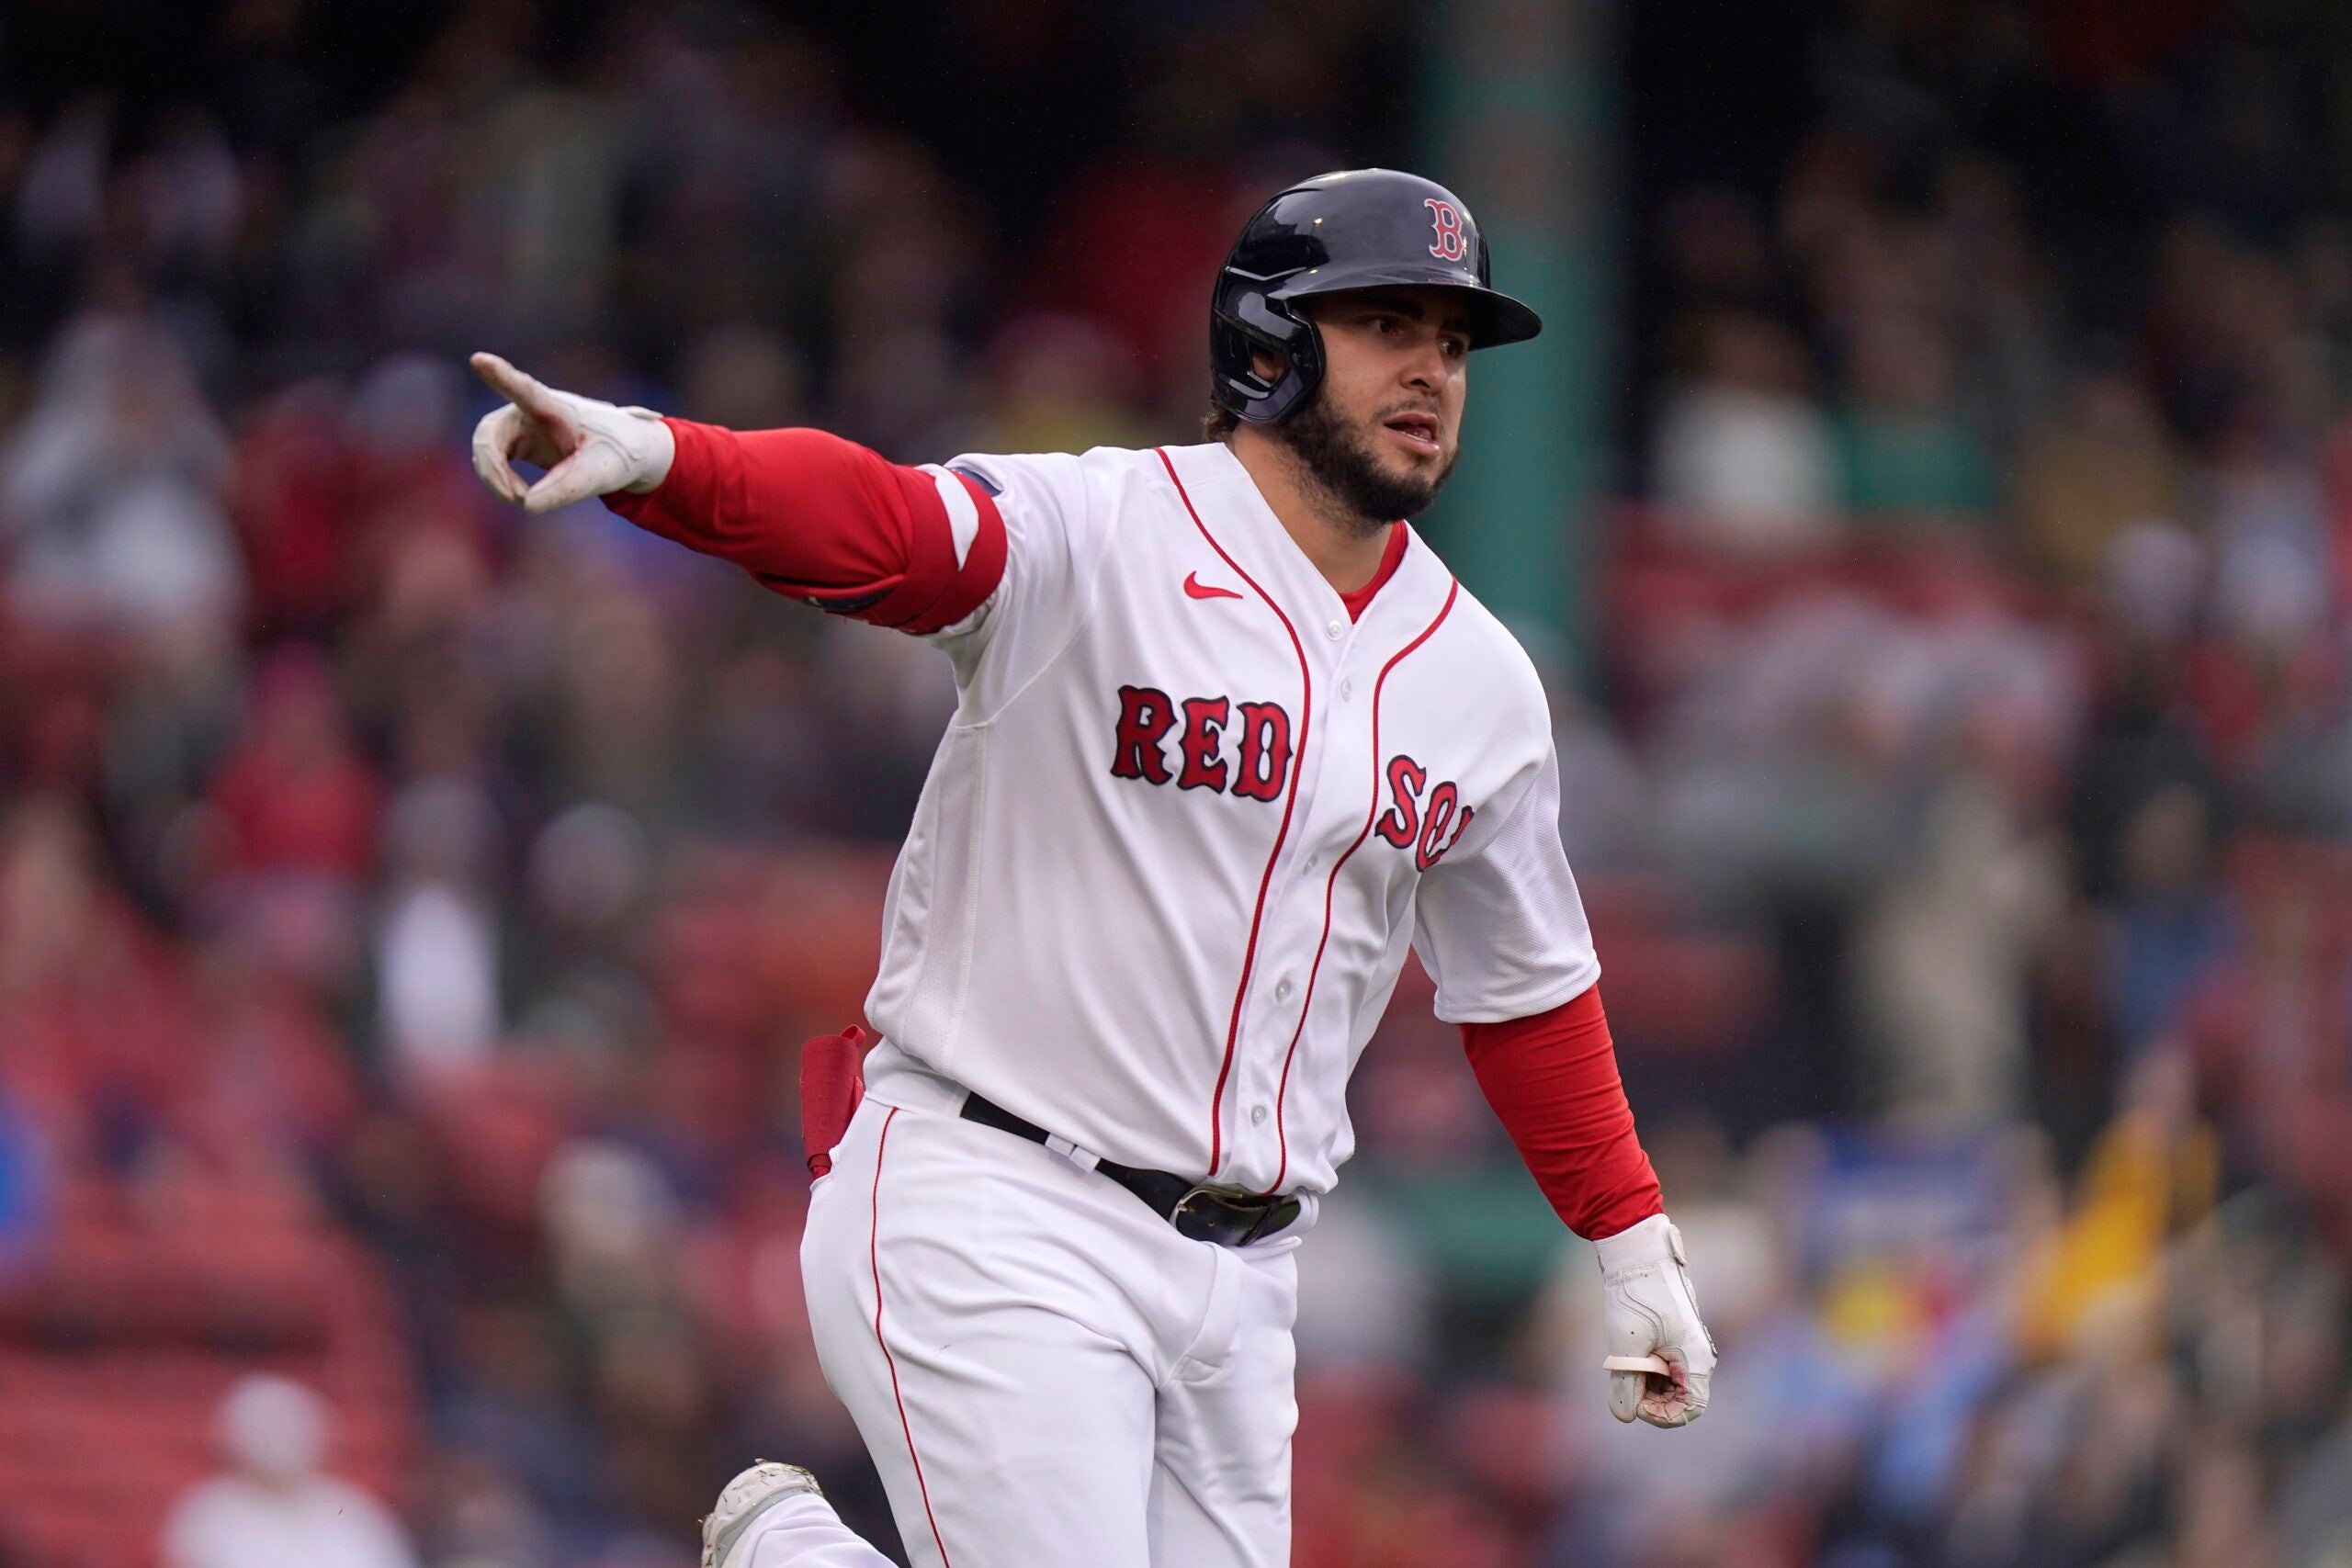 Is Red Sox outfielder Wilyer Abreu poised for a breakout season?